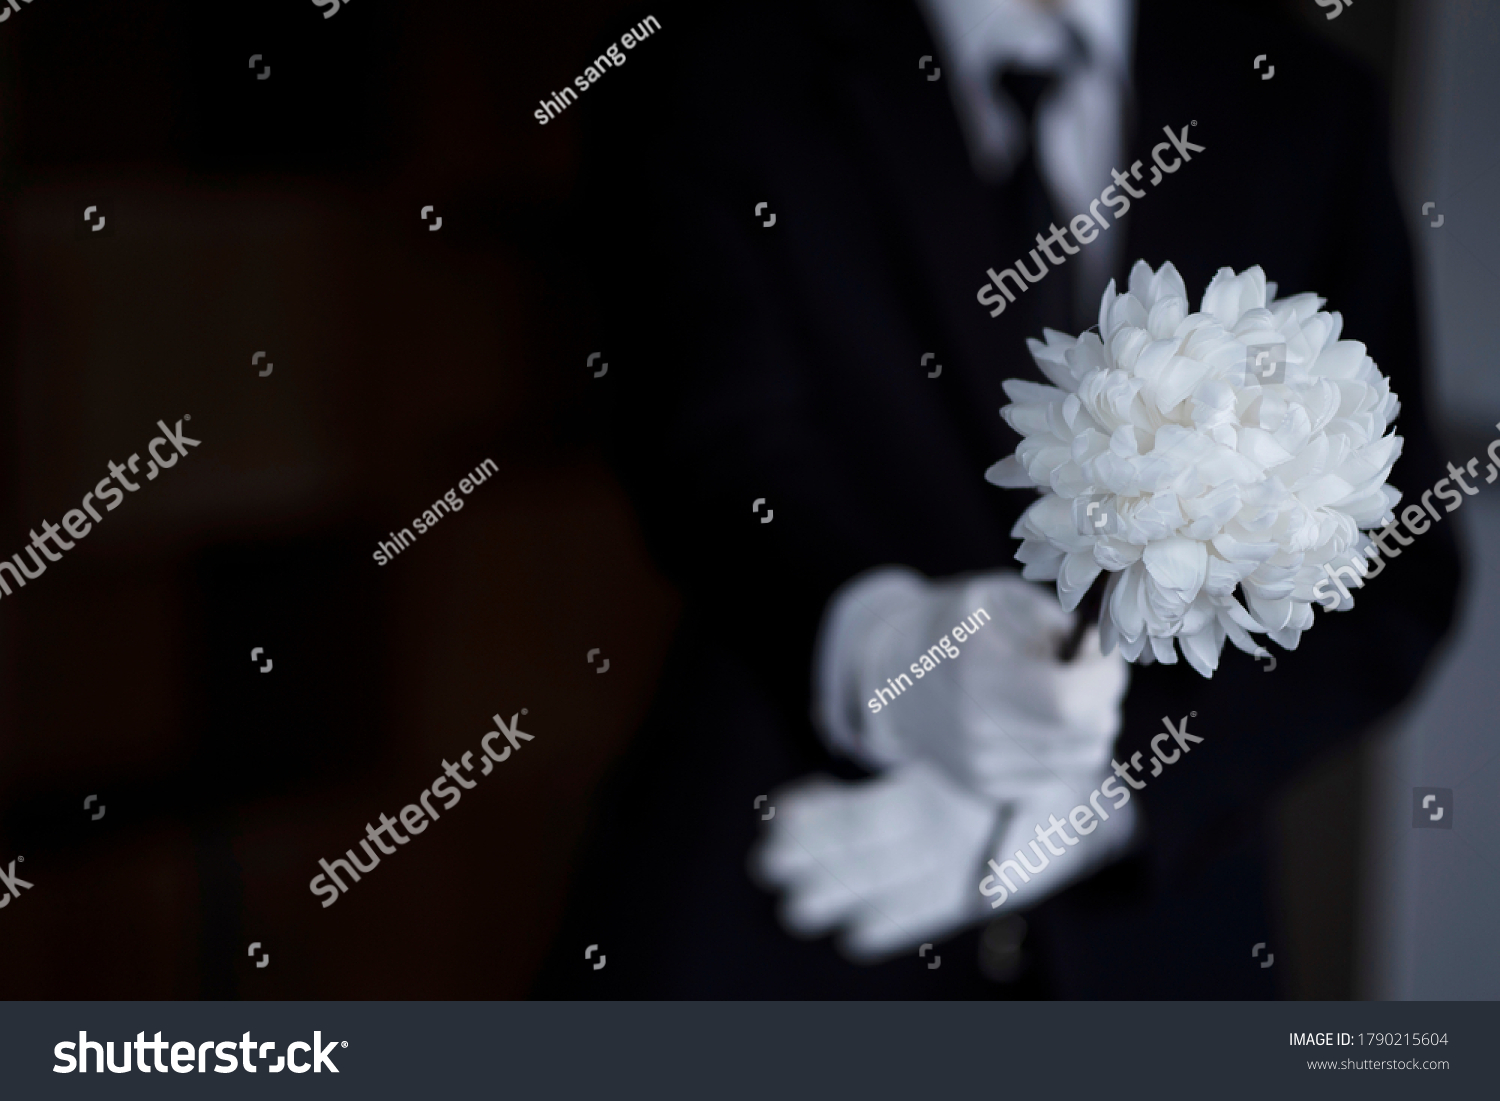 Bereaved holding flowers at funeral #1790215604